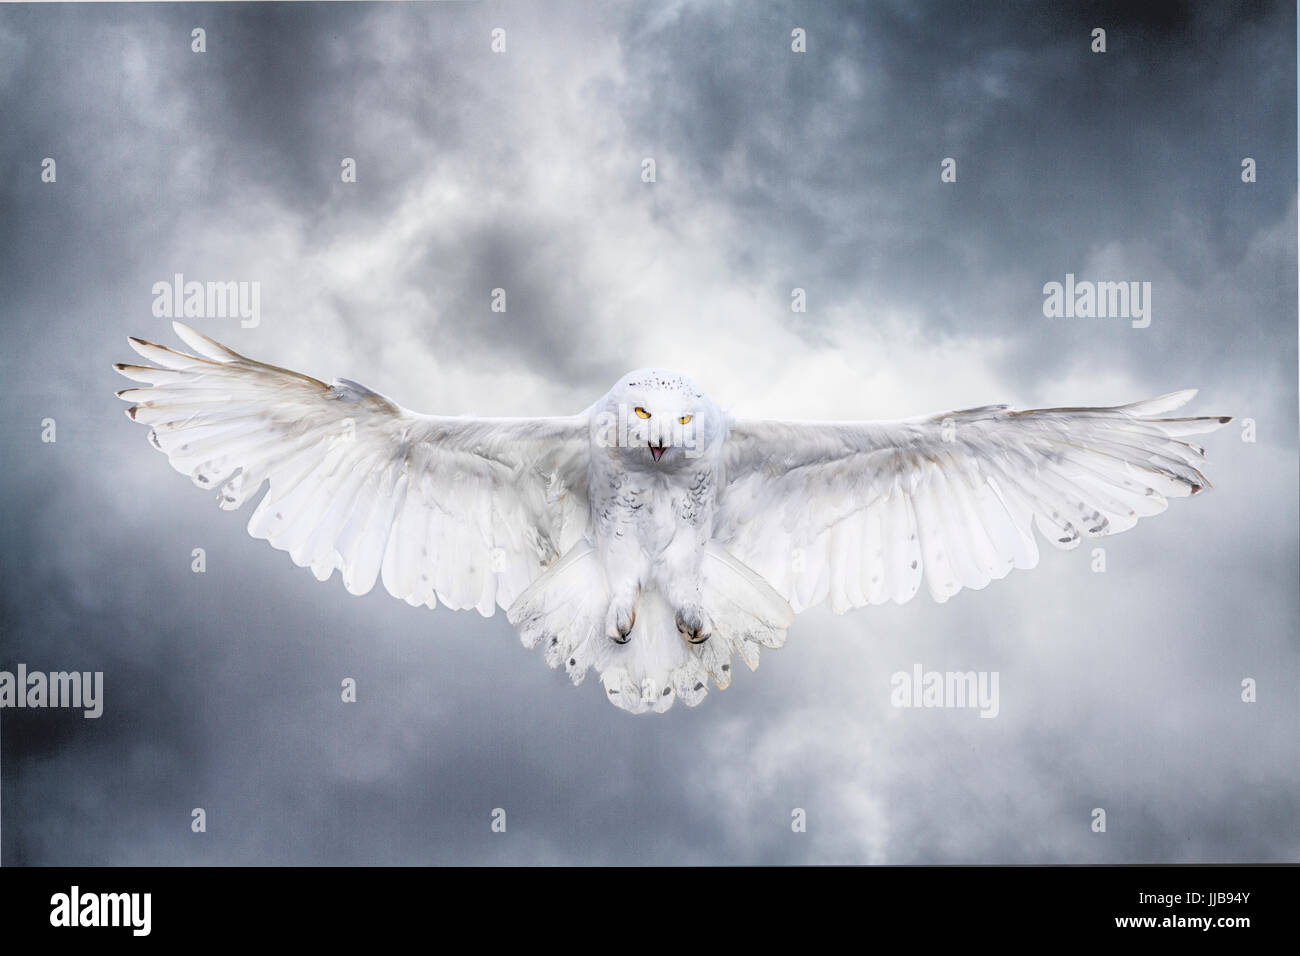 Snowy owl in flight against a stormy, snow-laden sky. Wings are outspread and feet are being lowered for landing. Stock Photo